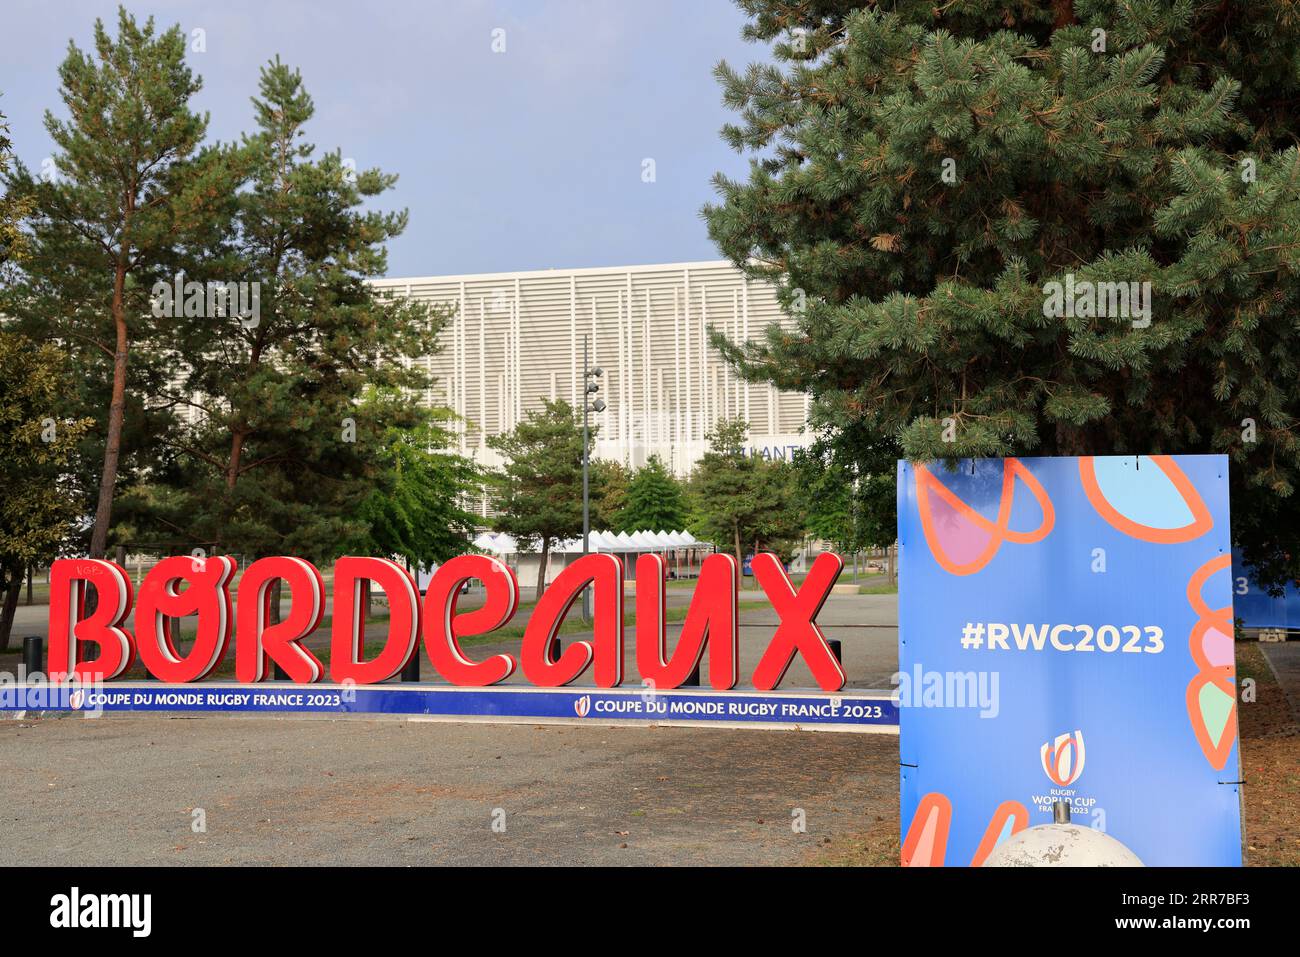 Bordeaux, France. September 6, 2023. The Matmut Atlantique multifunctional stadium in Bordeaux is ready to host 5 matches of the 2023 Rugby World Cup (Ireland-Romania, Wales-Fiji, Samoa-Chile, South Africa-Romania, Fiji-Georgia). Photo by Hugo Martin Alamy Live News. Stock Photo